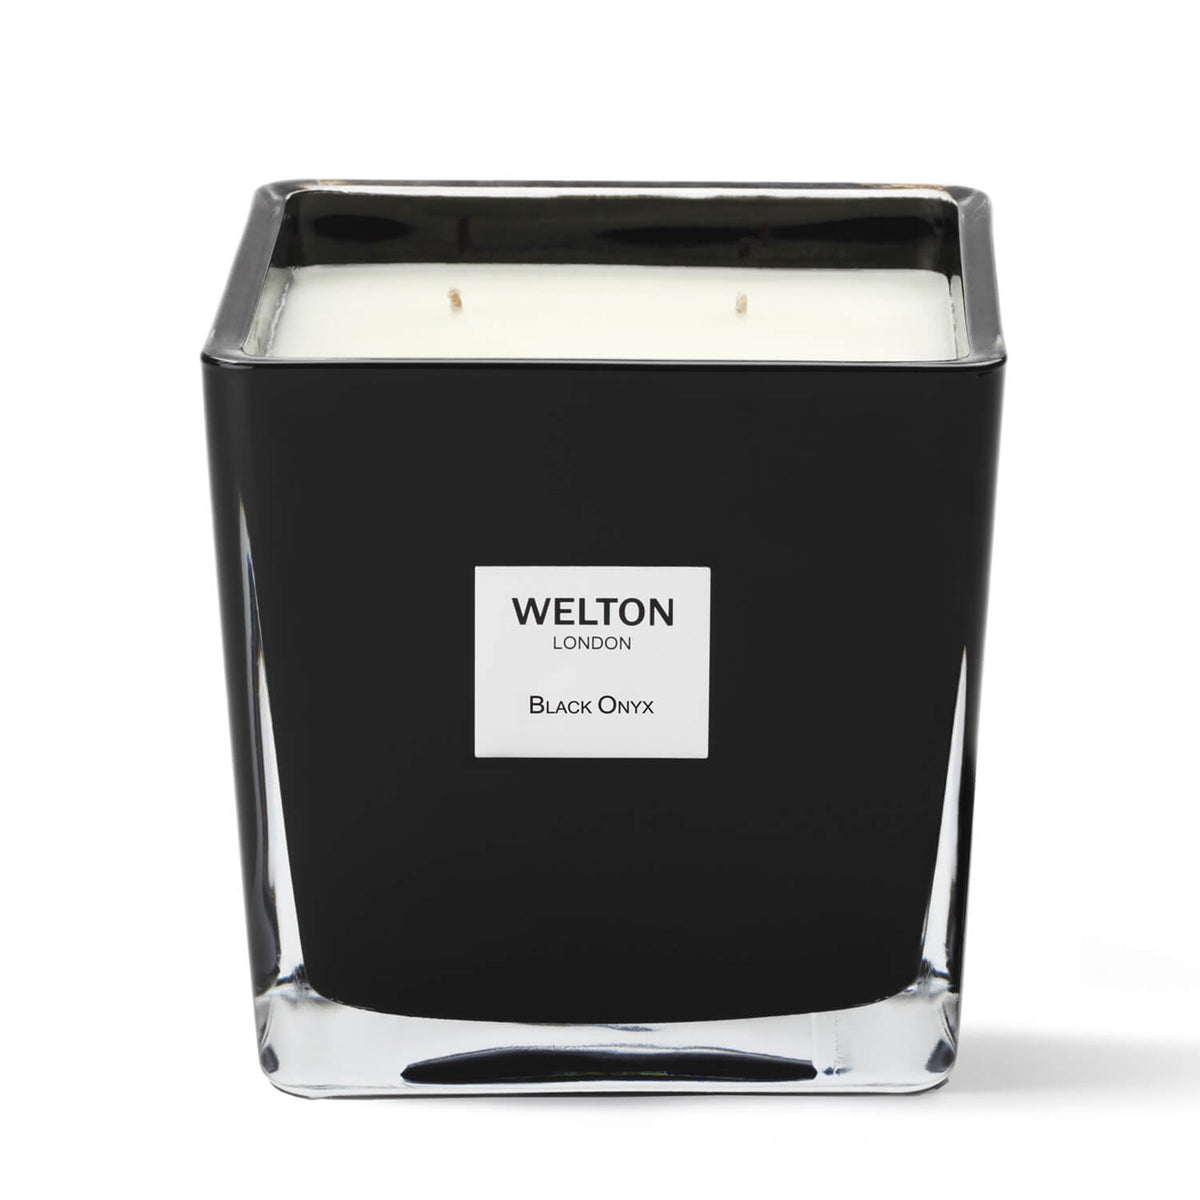 CANDLE BLACK ONYX LARGE
CITRUS - WOODY - SPICY